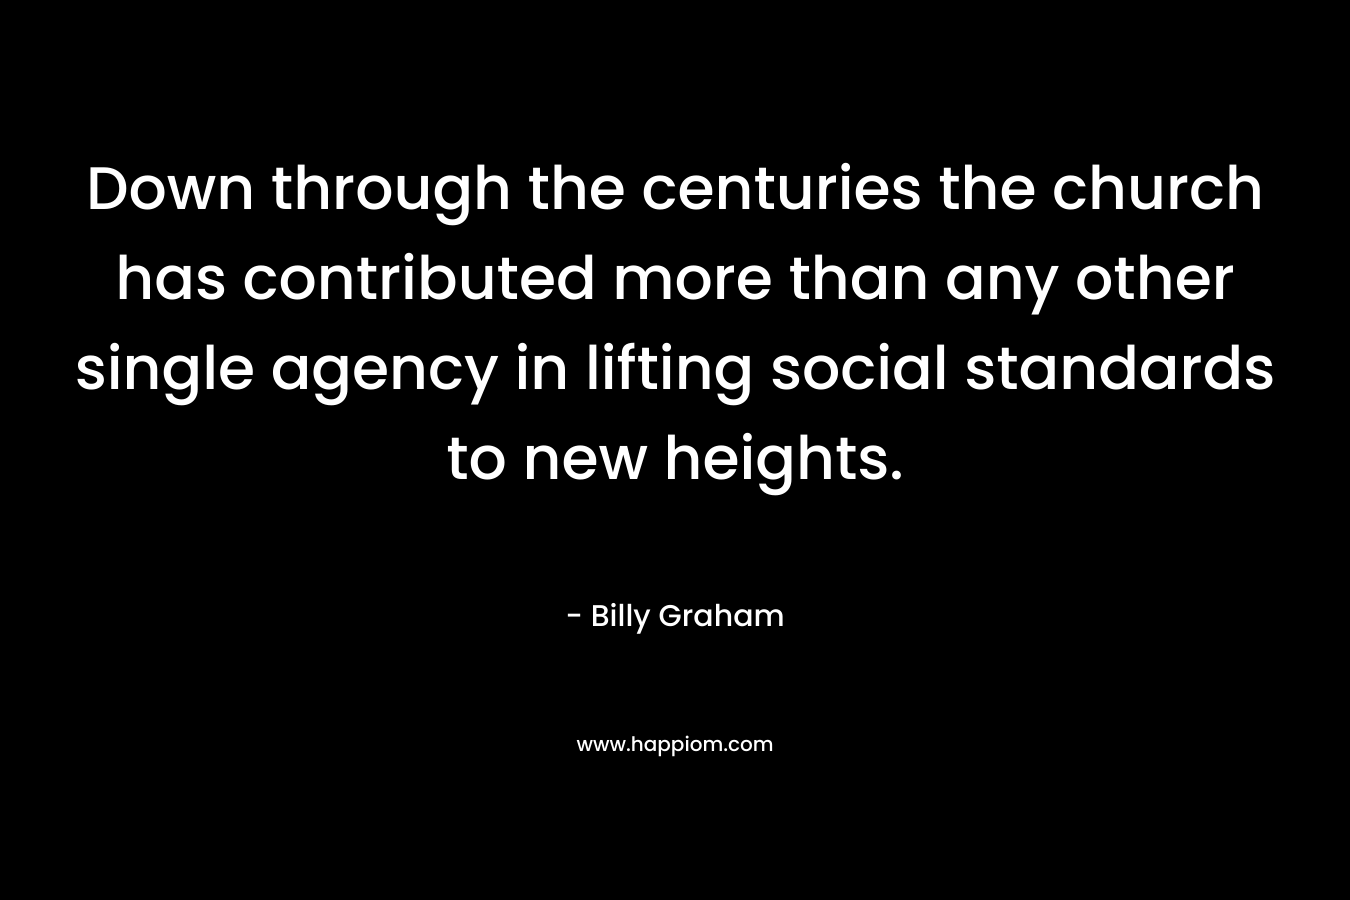 Down through the centuries the church has contributed more than any other single agency in lifting social standards to new heights. – Billy Graham